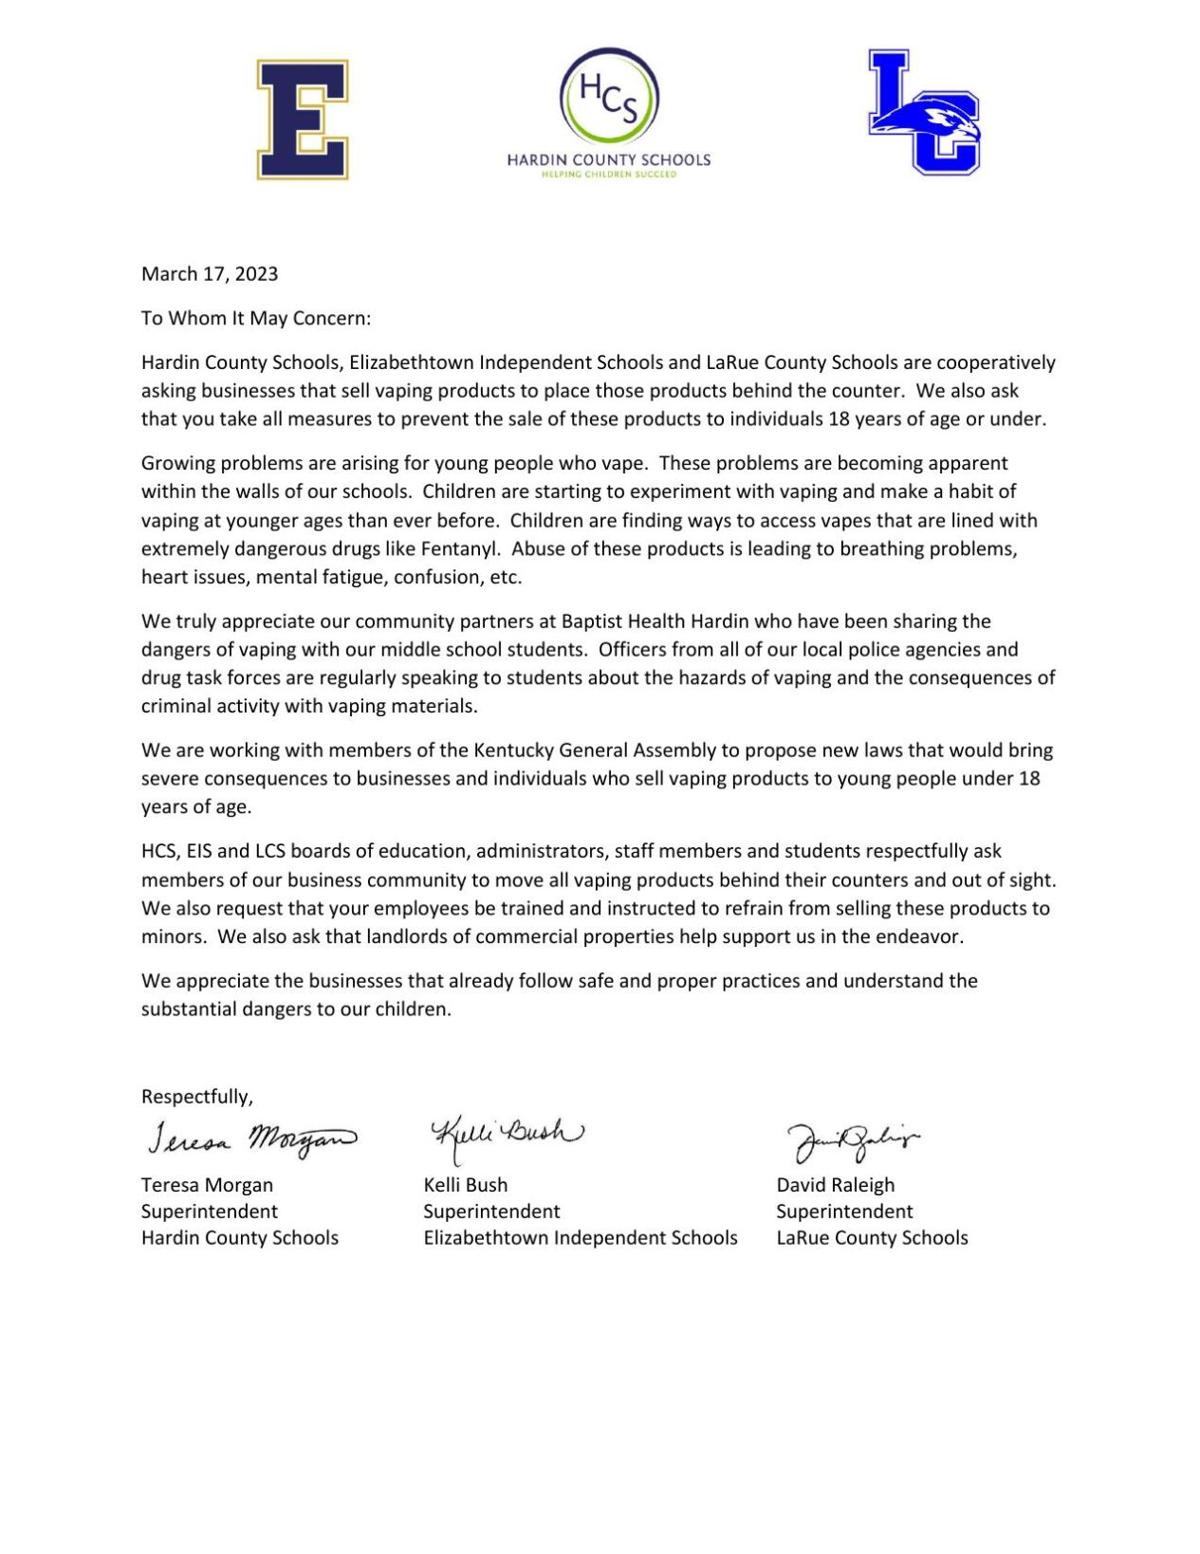 HCS, LCS and EIS letter to vaping businesses